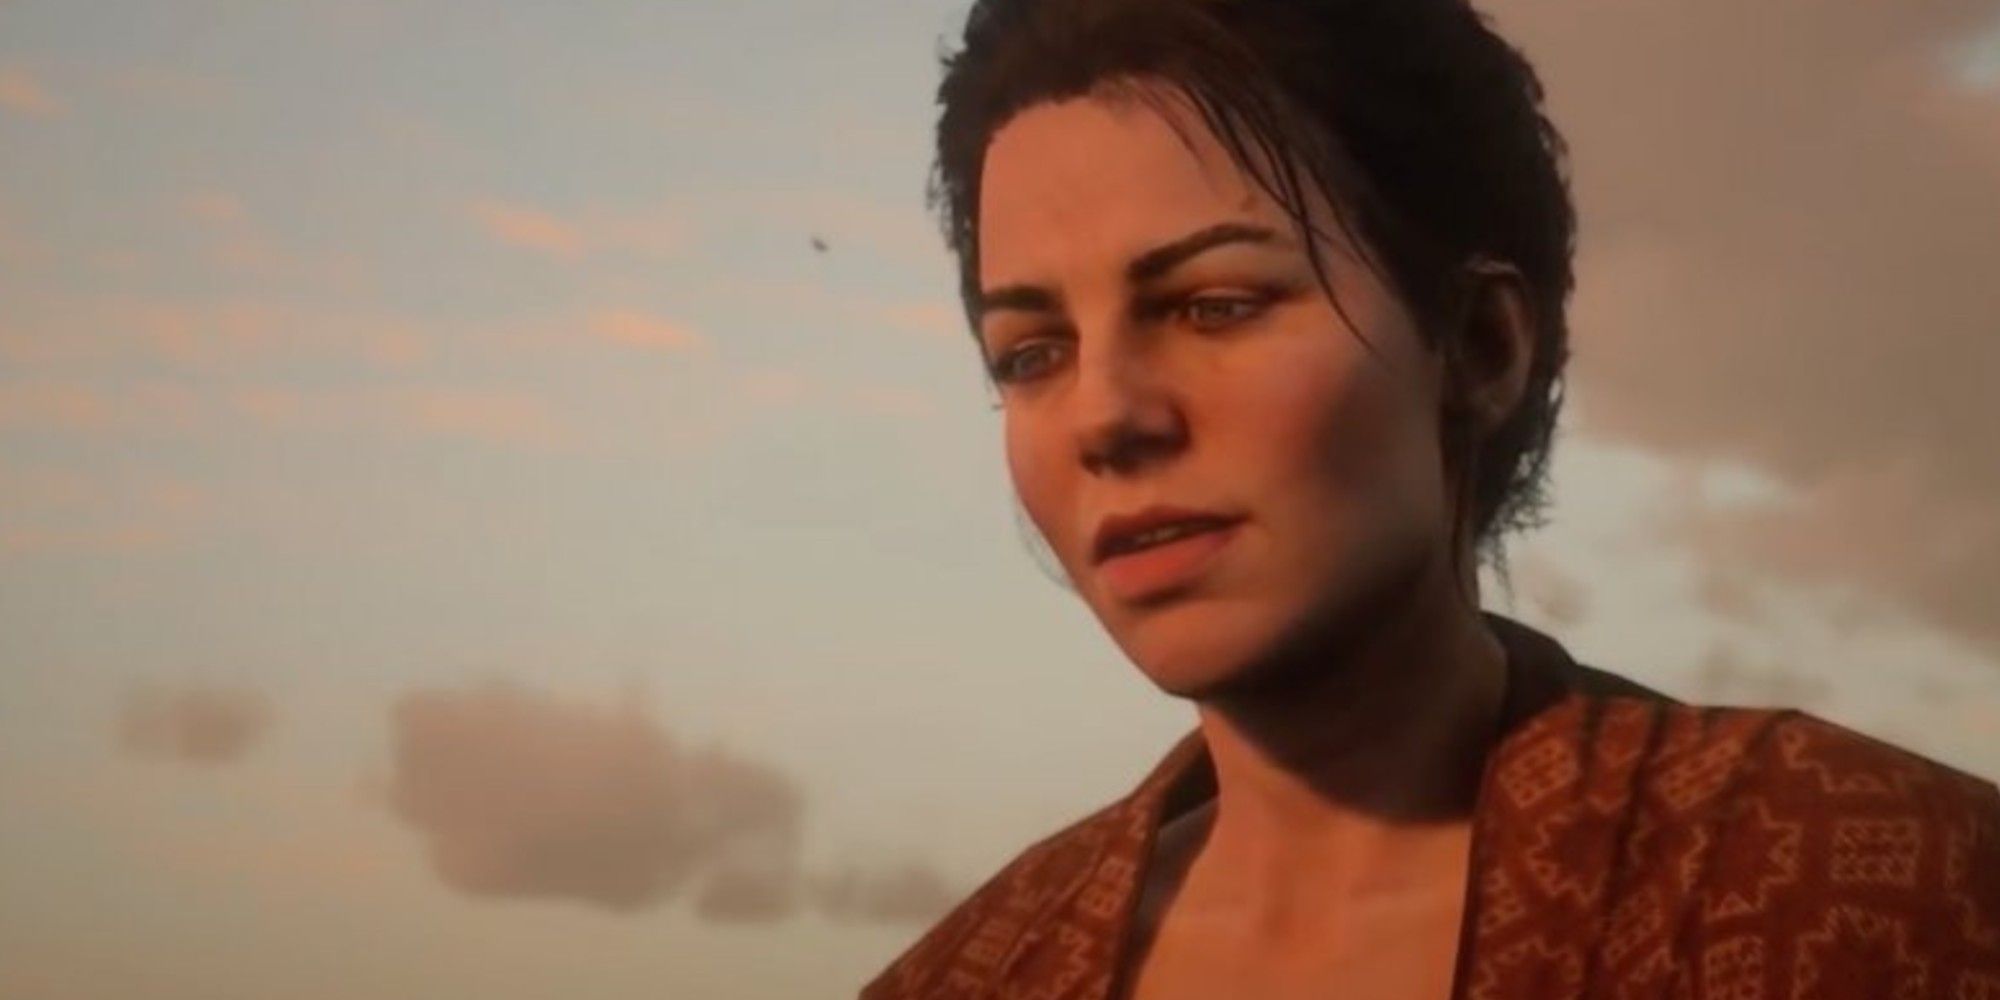 abigail marston looking down in red dead redemption 2